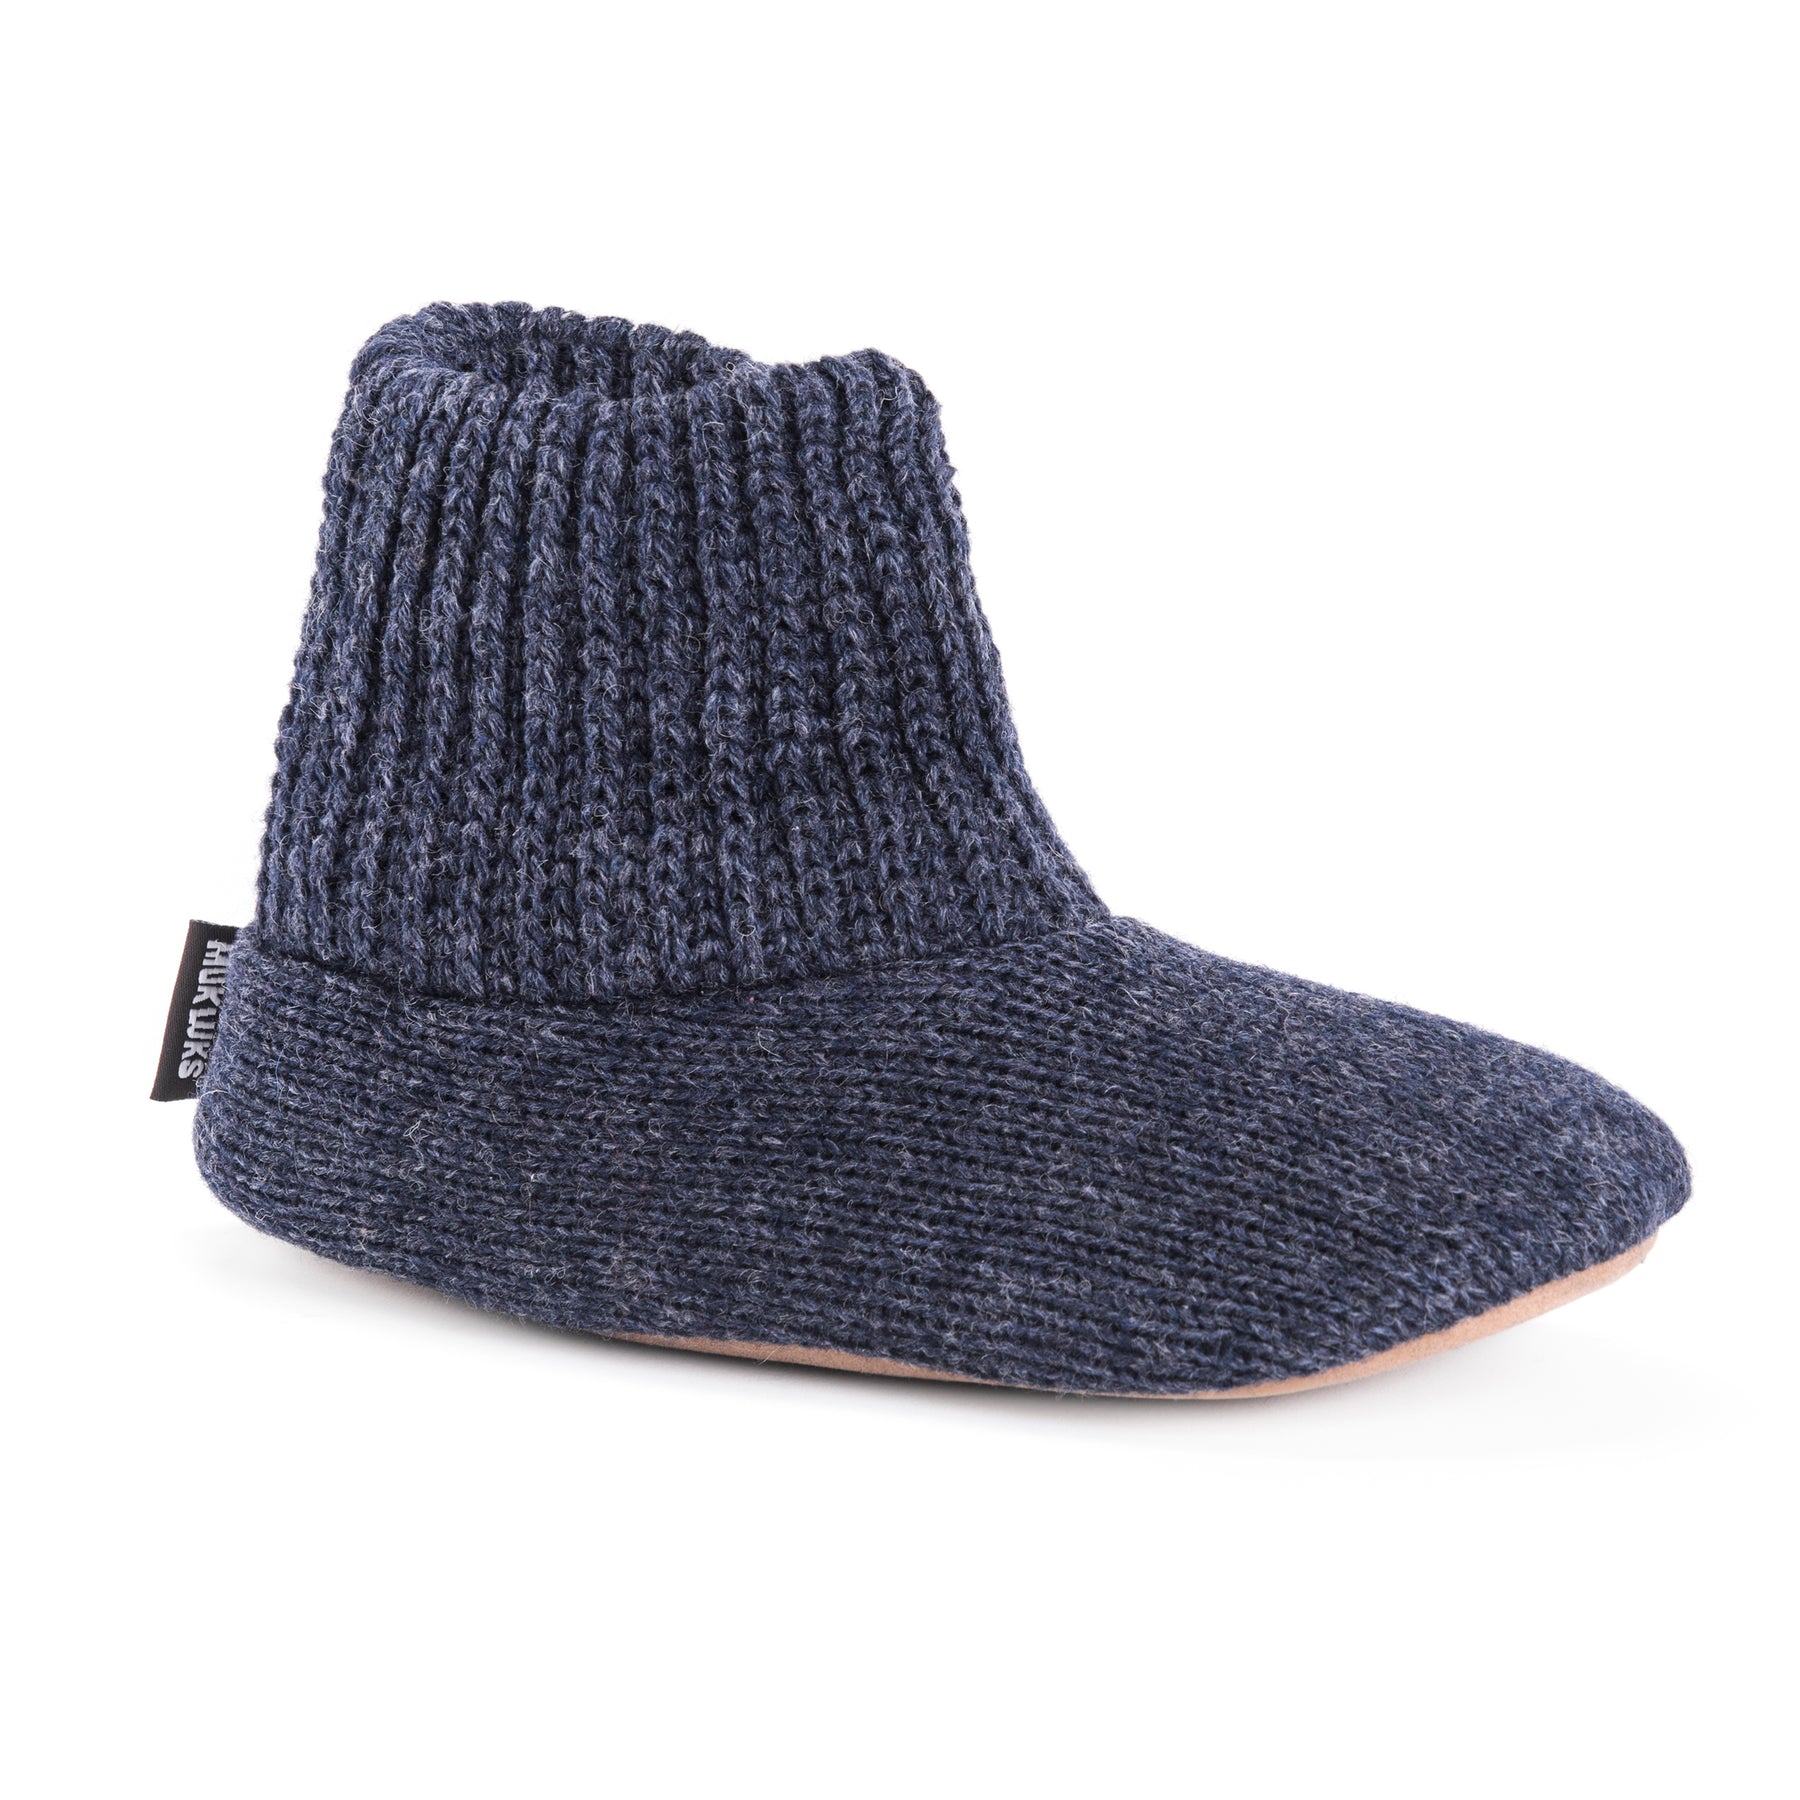 Blue Merino Wool Slippers Boots With Sole for Men Eco - Etsy UK